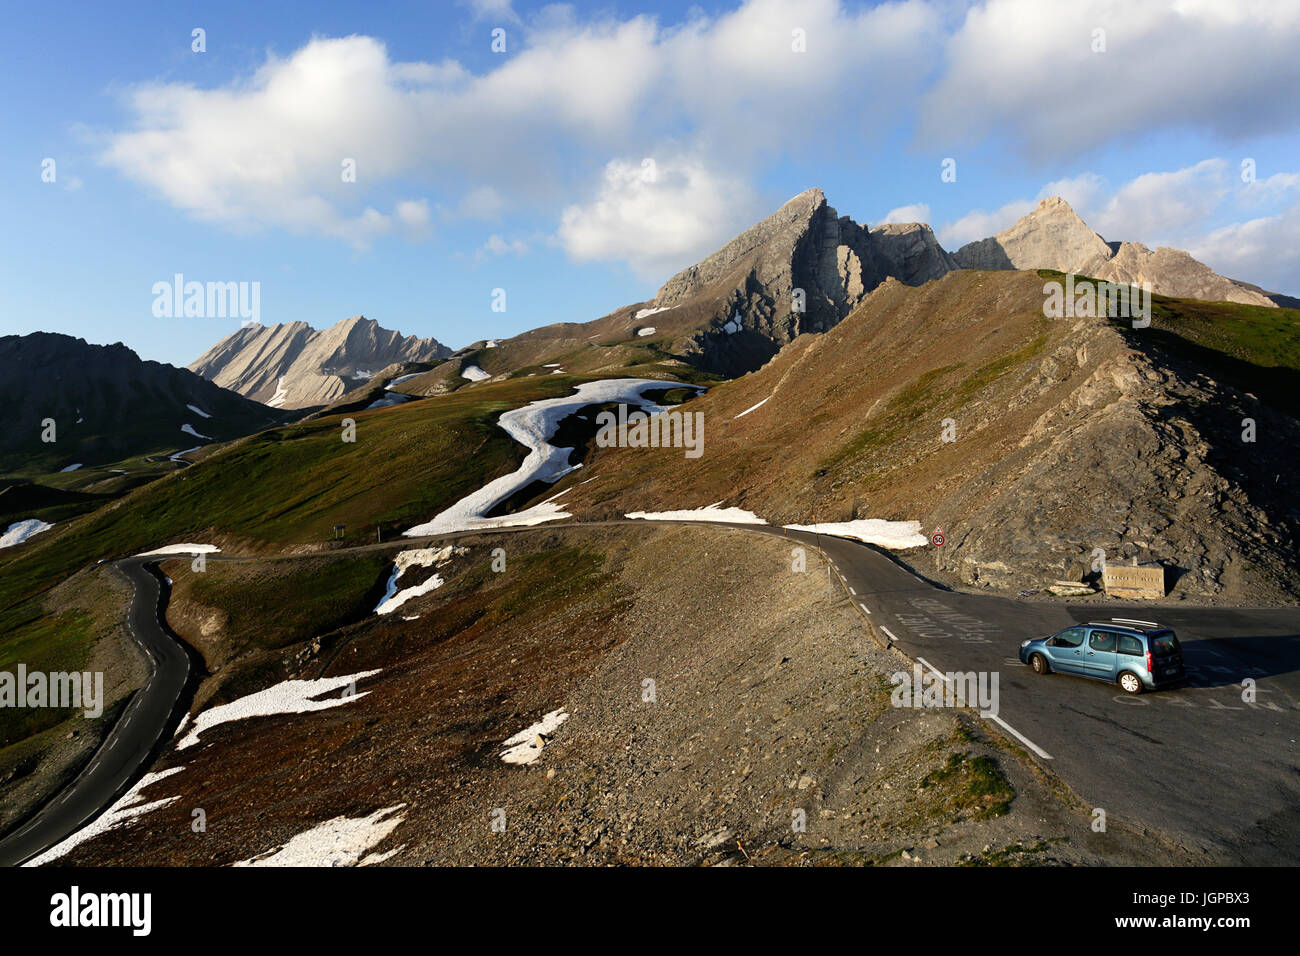 Car on a scenic mountain road in french alps, Col Agnel, France. Stock Photo